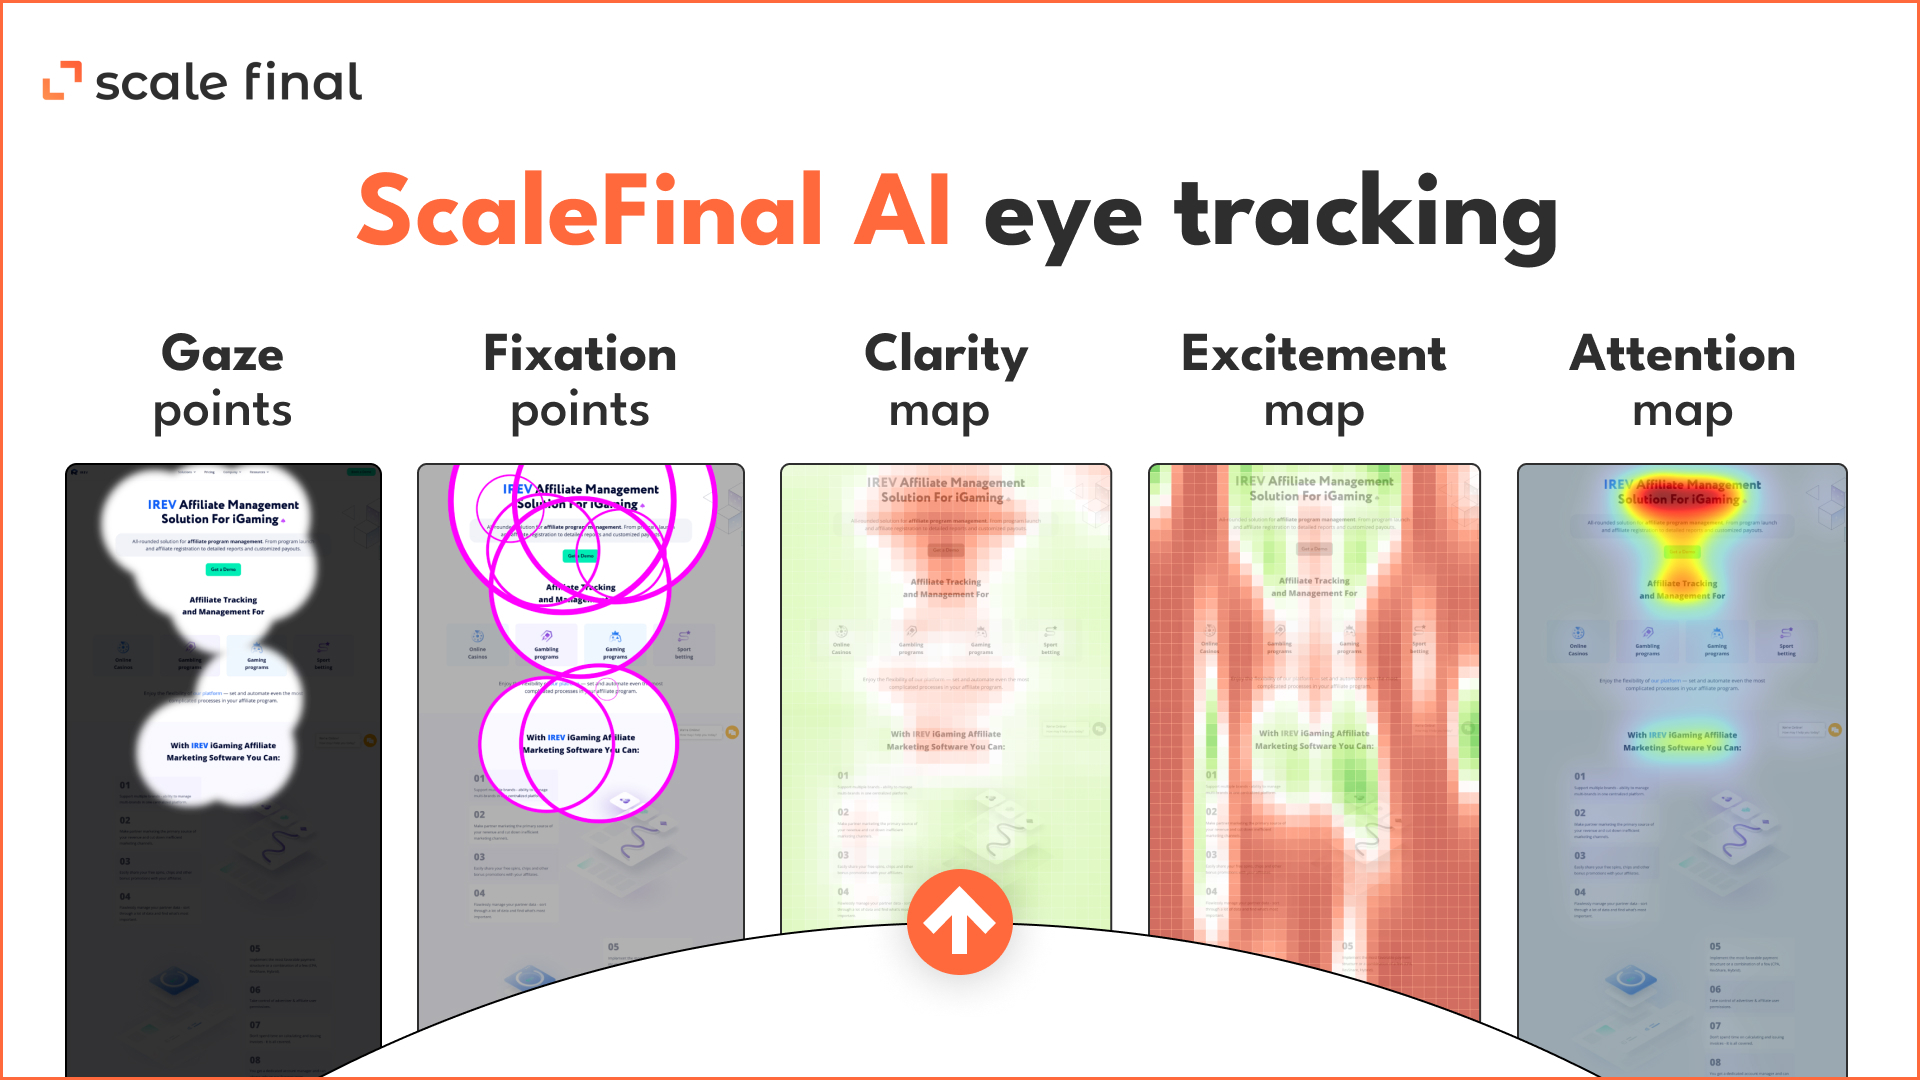 ScaleFinal AI eye tracking: Gaze pointsFixation pointsClarity map Excitement mapAttention map